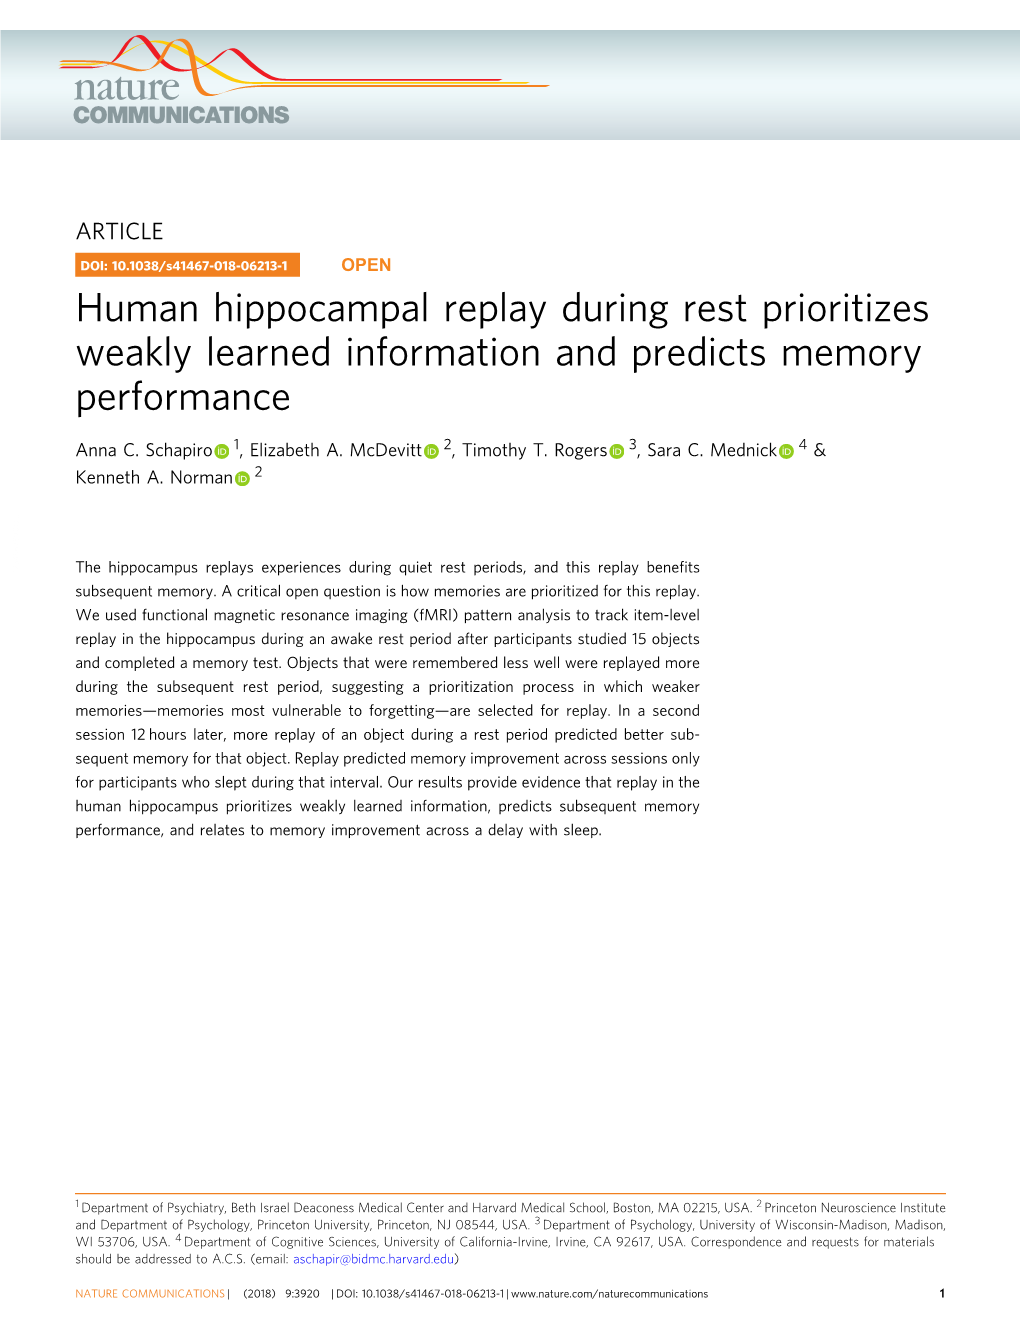 Human Hippocampal Replay During Rest Prioritizes Weakly Learned Information and Predicts Memory Performance